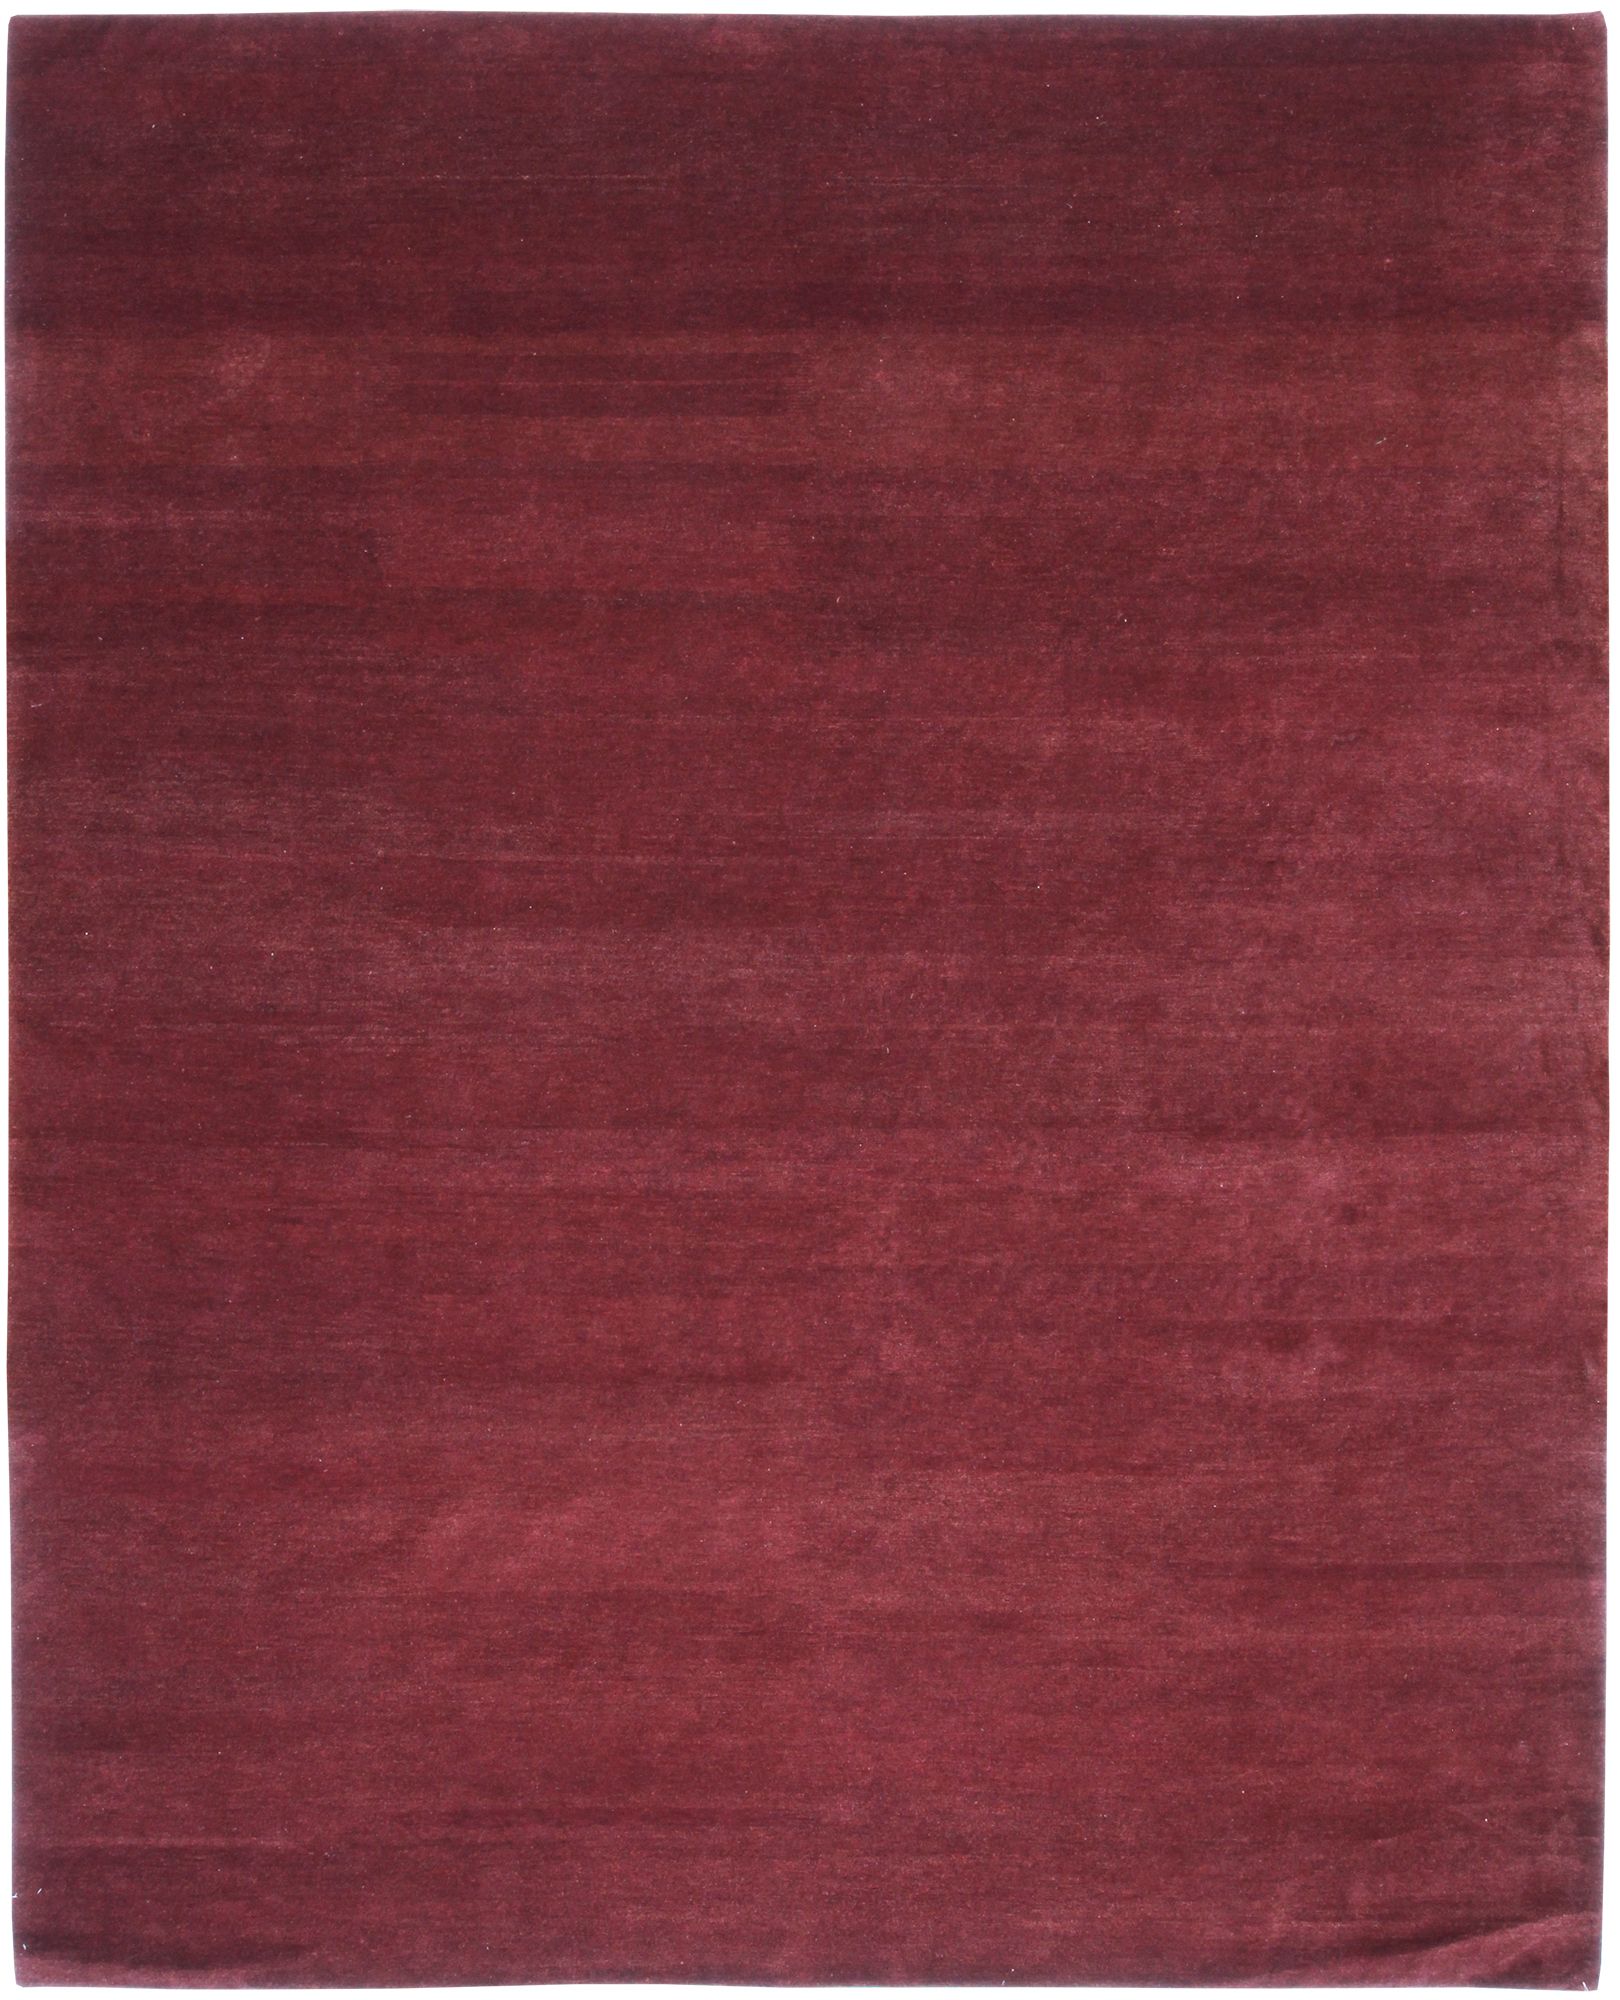 Solid Burgundy 9x12 Wool Area Rug | Turco Persian With Regard To Burgundy Rugs (View 2 of 15)